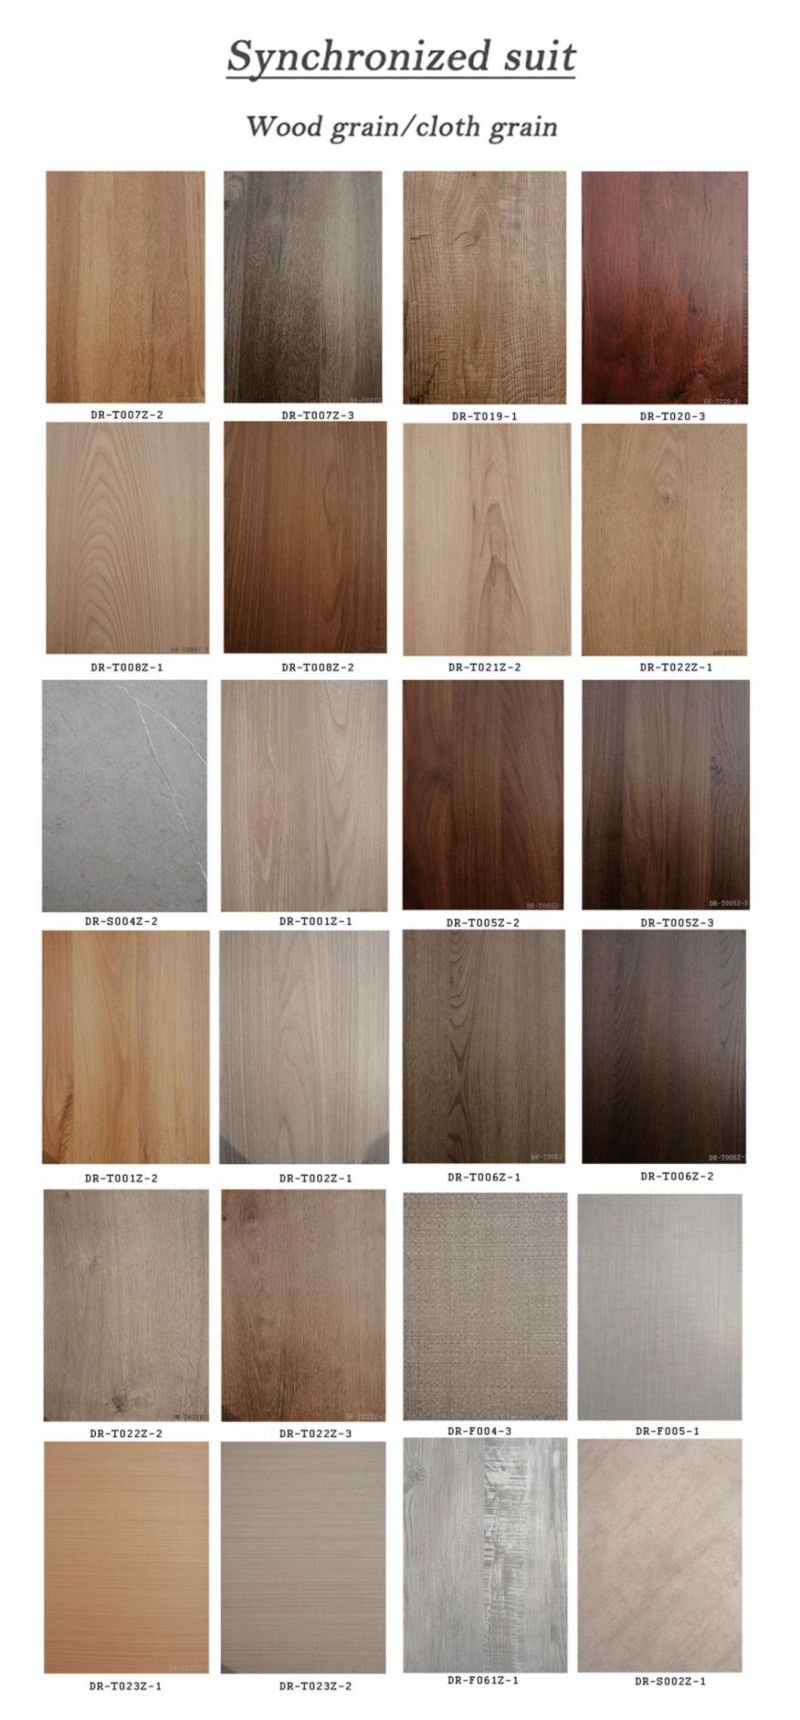 17 16mm Double Sided Melamine MDF Boards